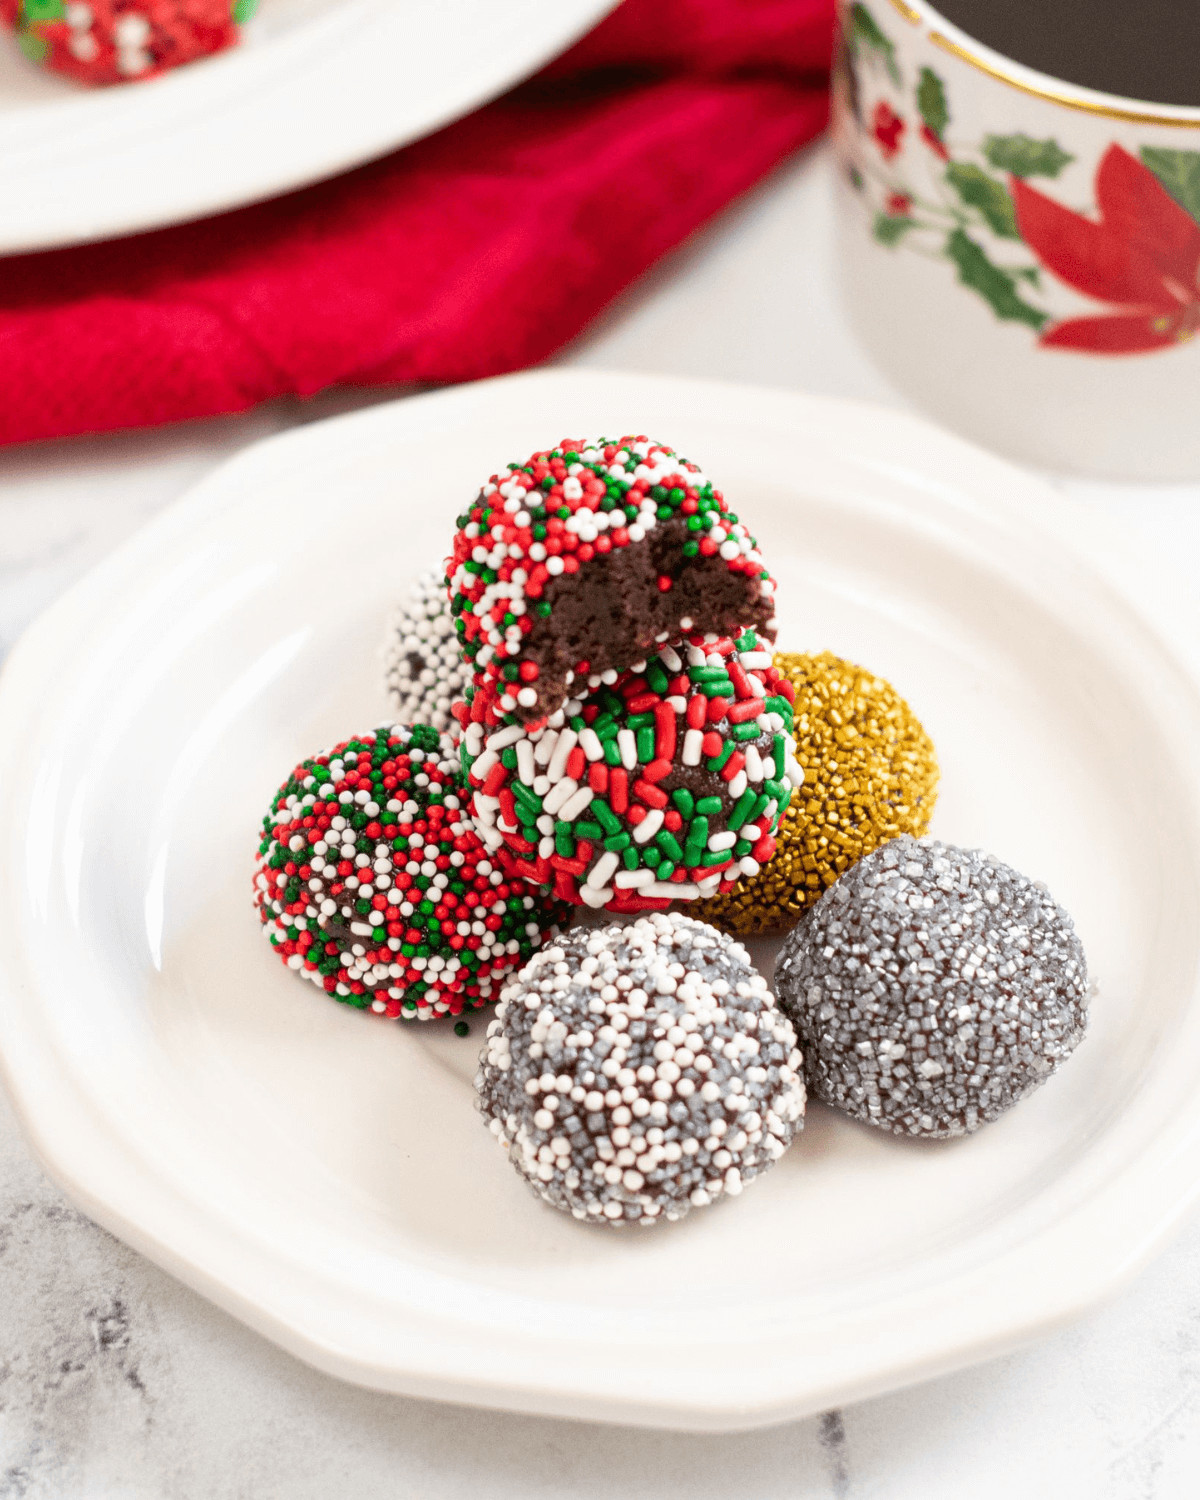 Five of the brownie balls with colorful sprinkles.